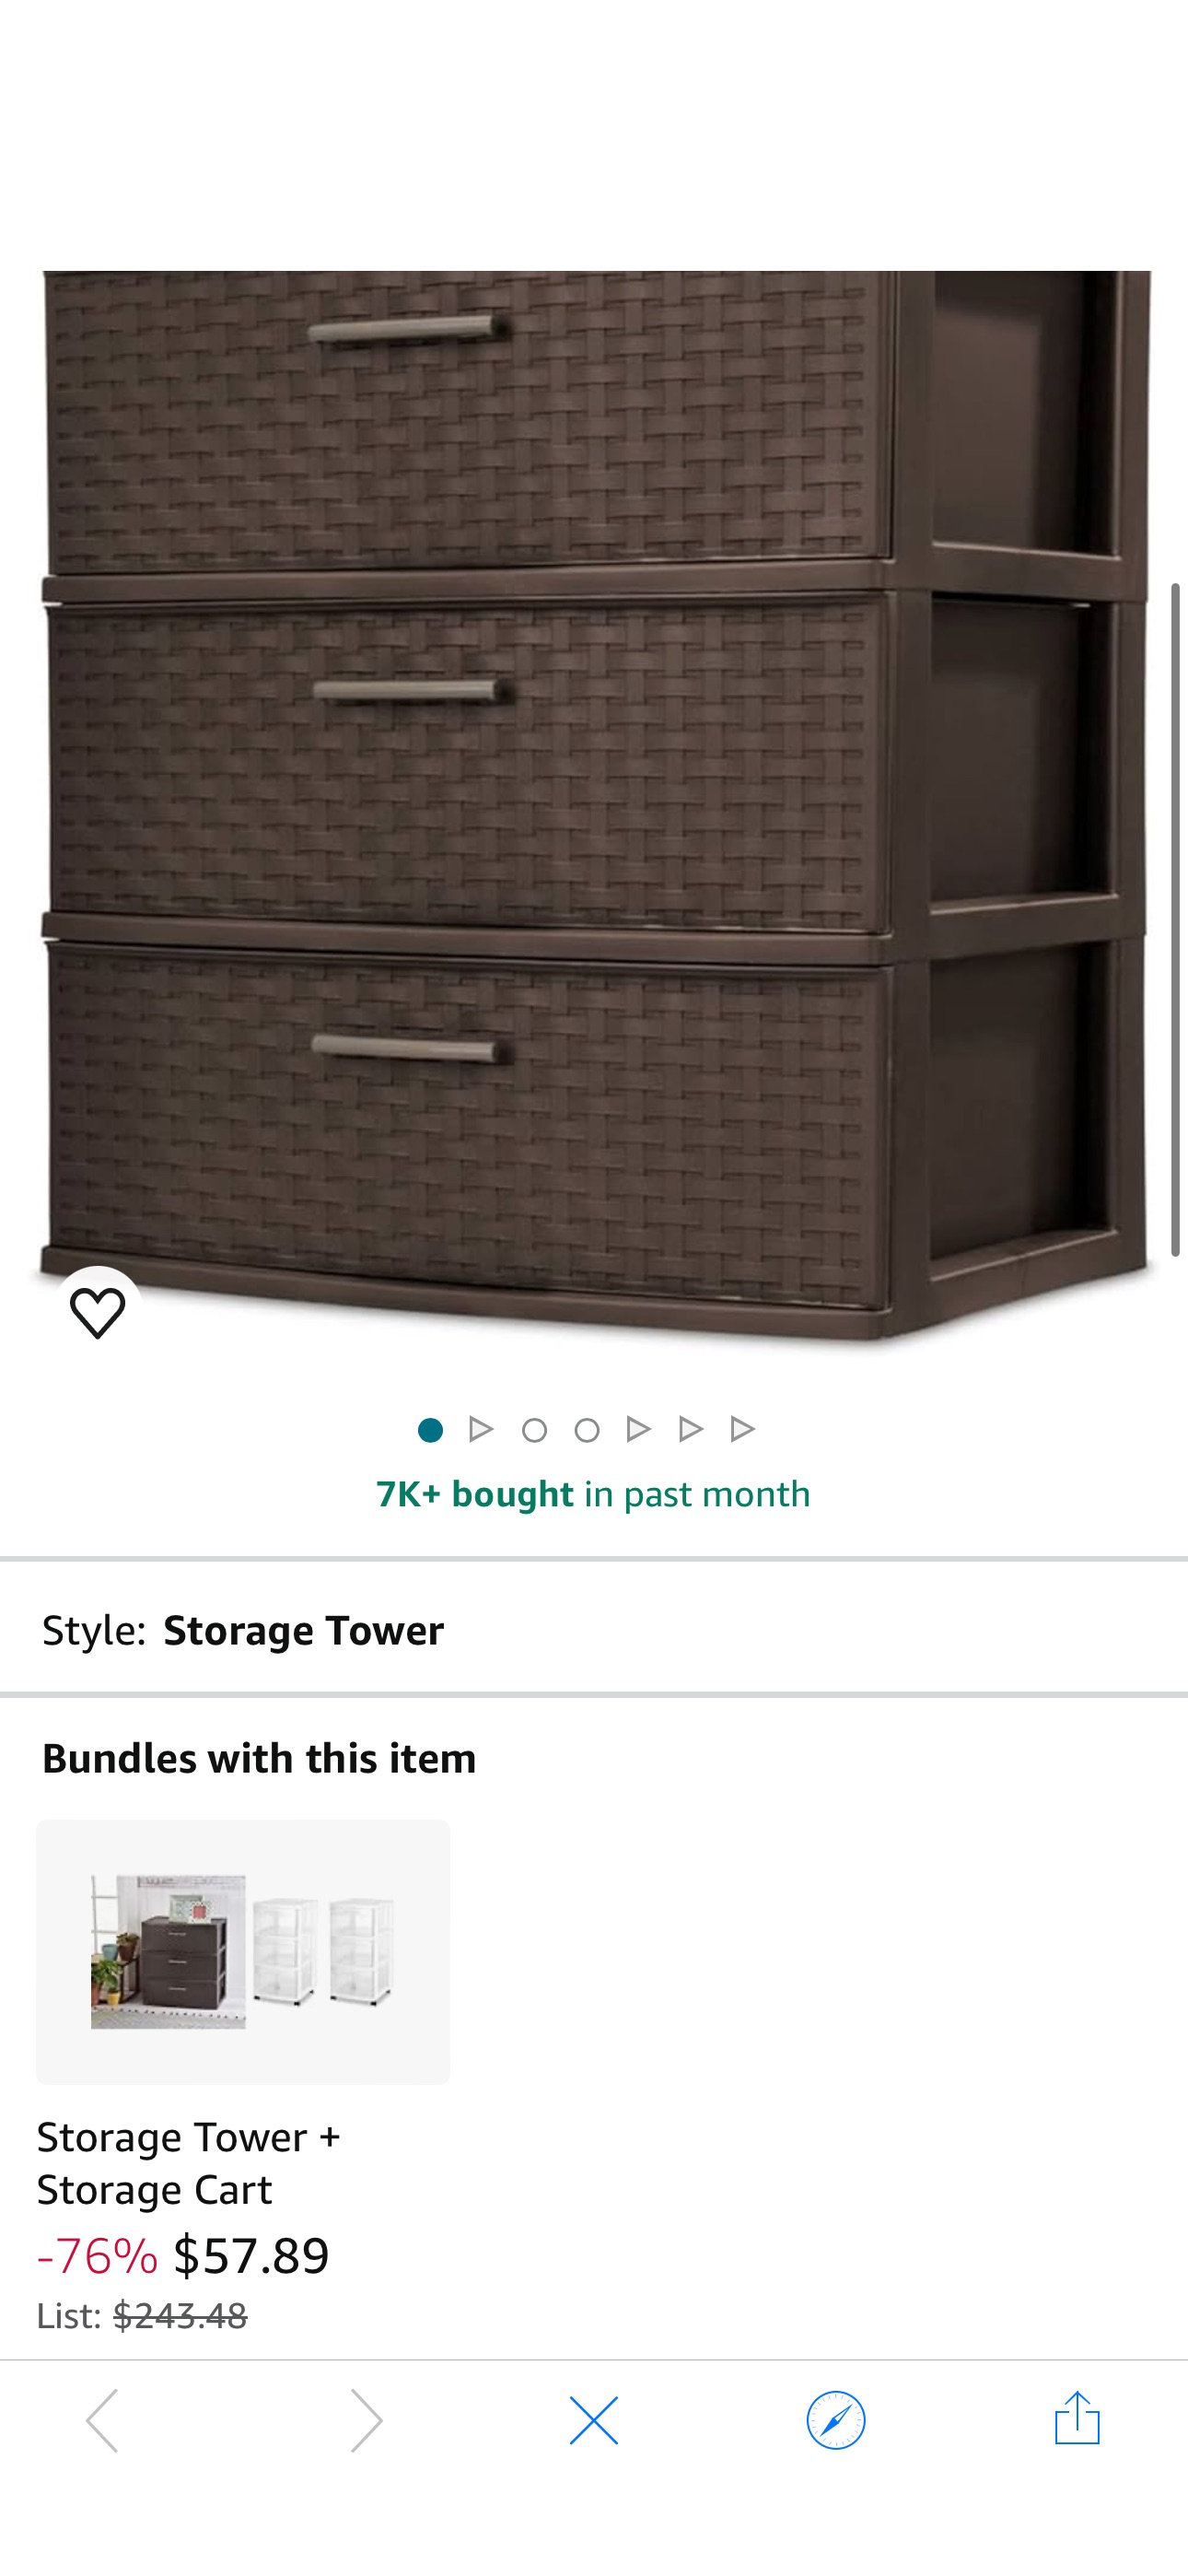 Amazon.com: Sterilite 3 Drawer Wide Weave Storage Tower, Plastic Decorative Drawers to Organize Clothes in Bedroom, Closet, Brown with Brown Drawers, 1-Pack : Home & Kitchen